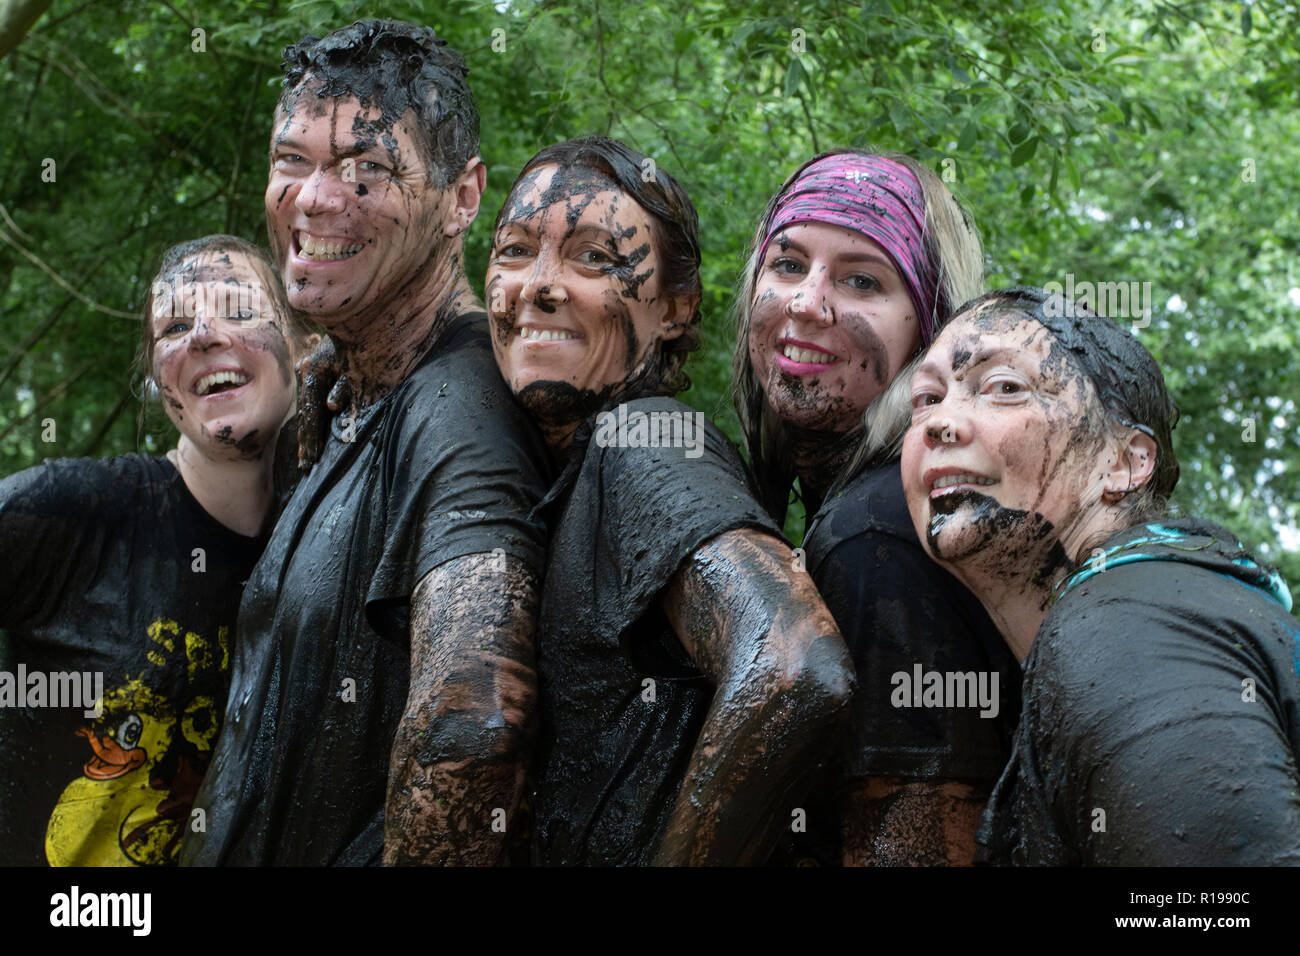 Mud runners posing hands on hips Stock Photo